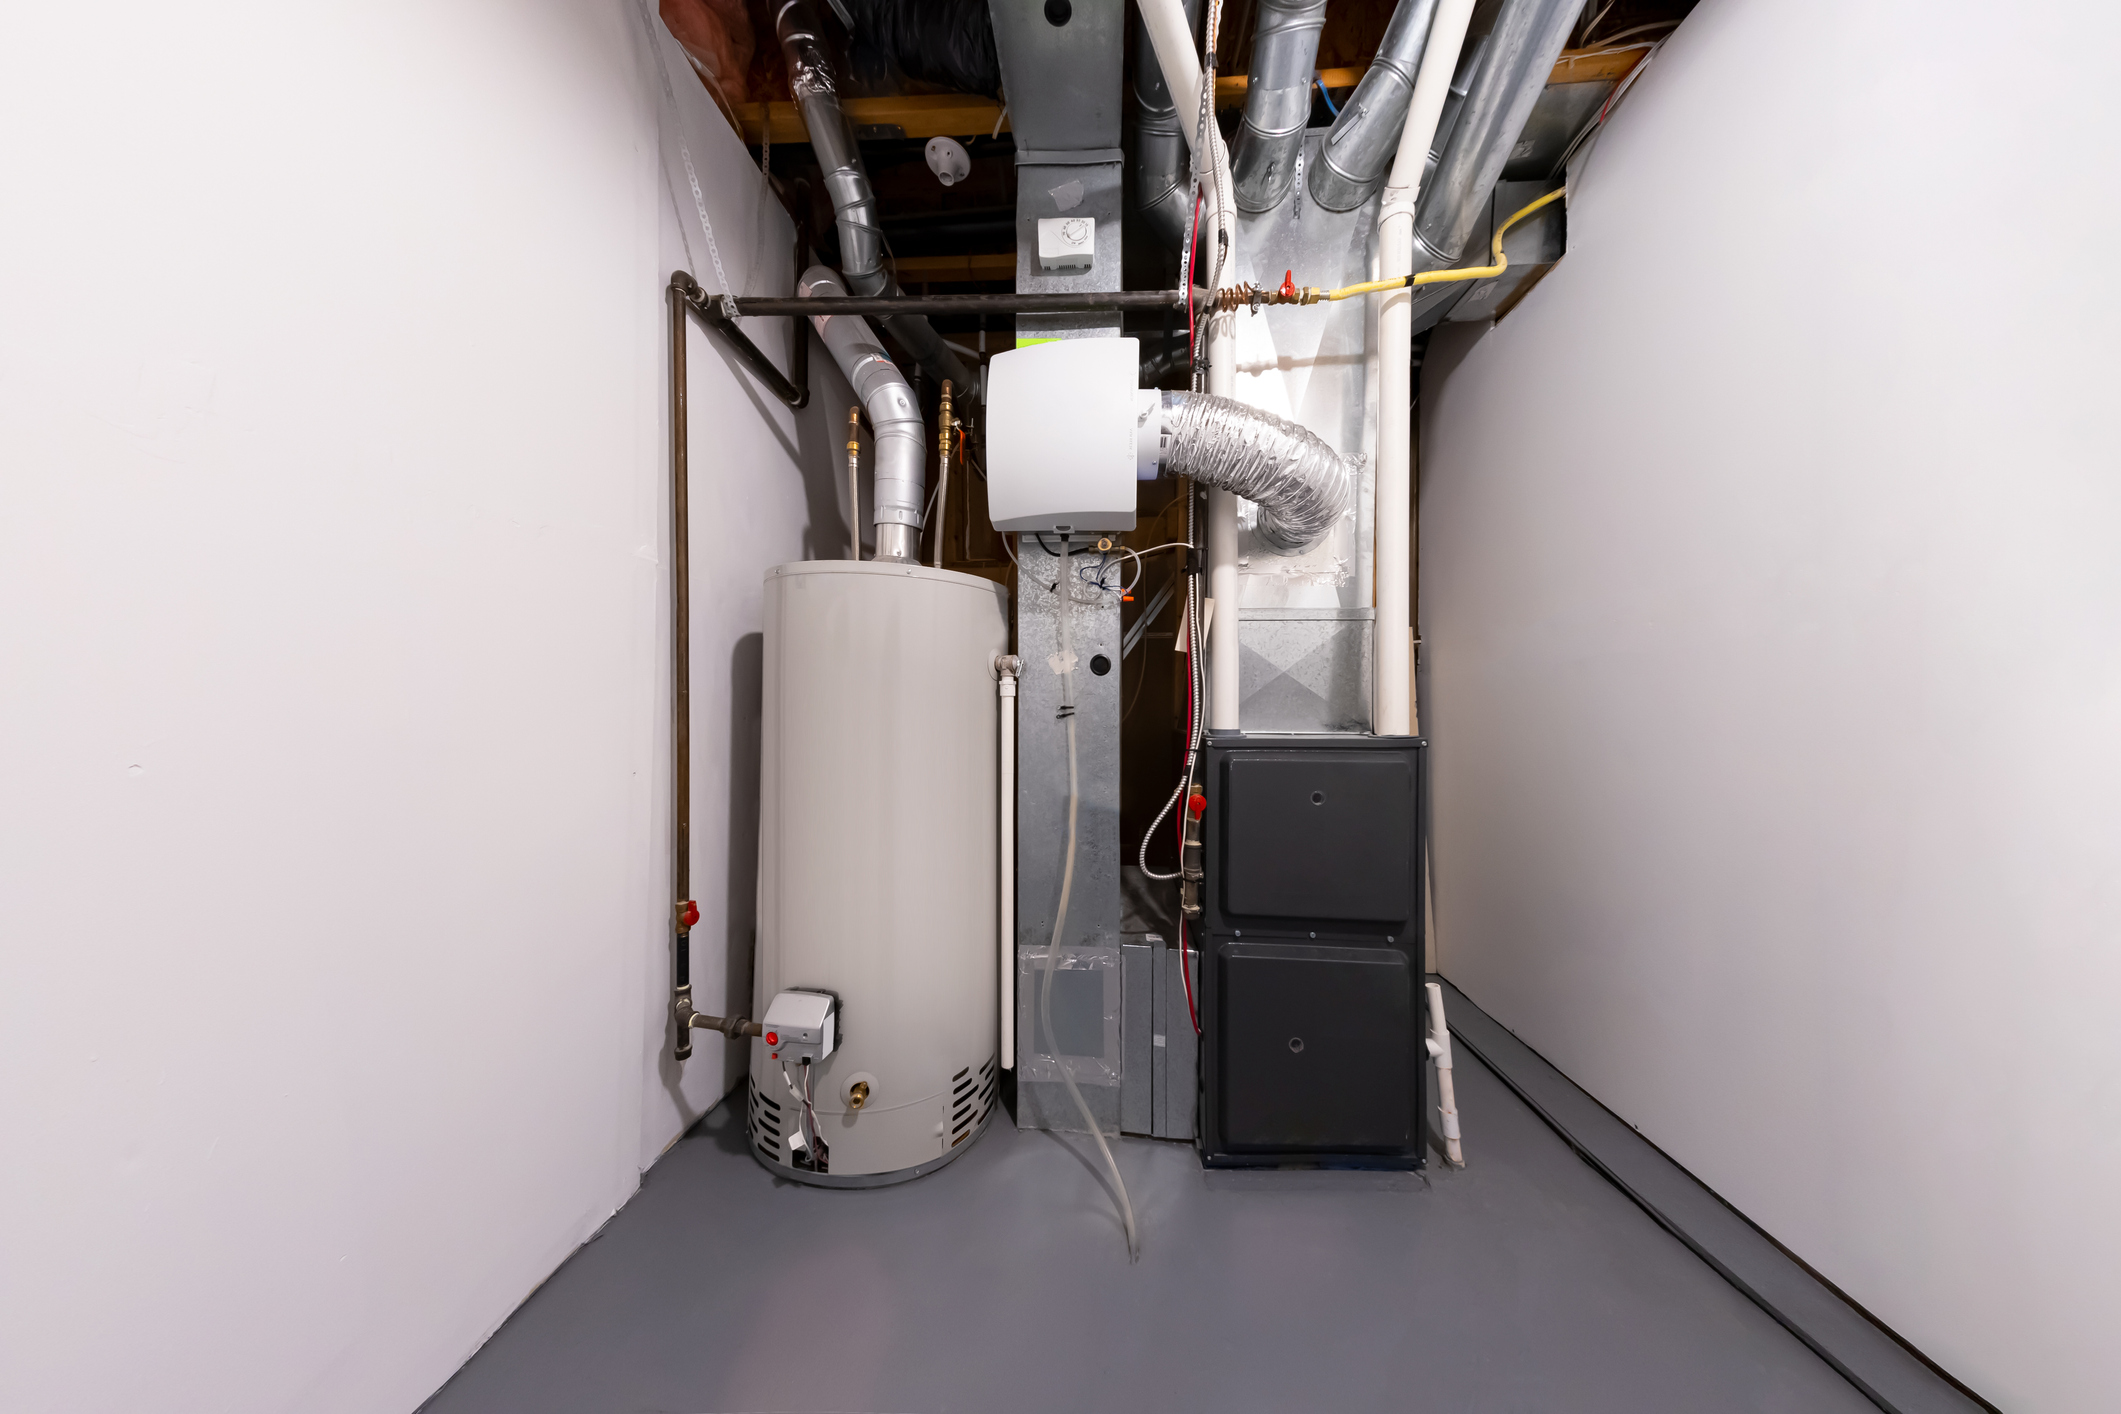 What Are The Different Types of Residential Furnaces?